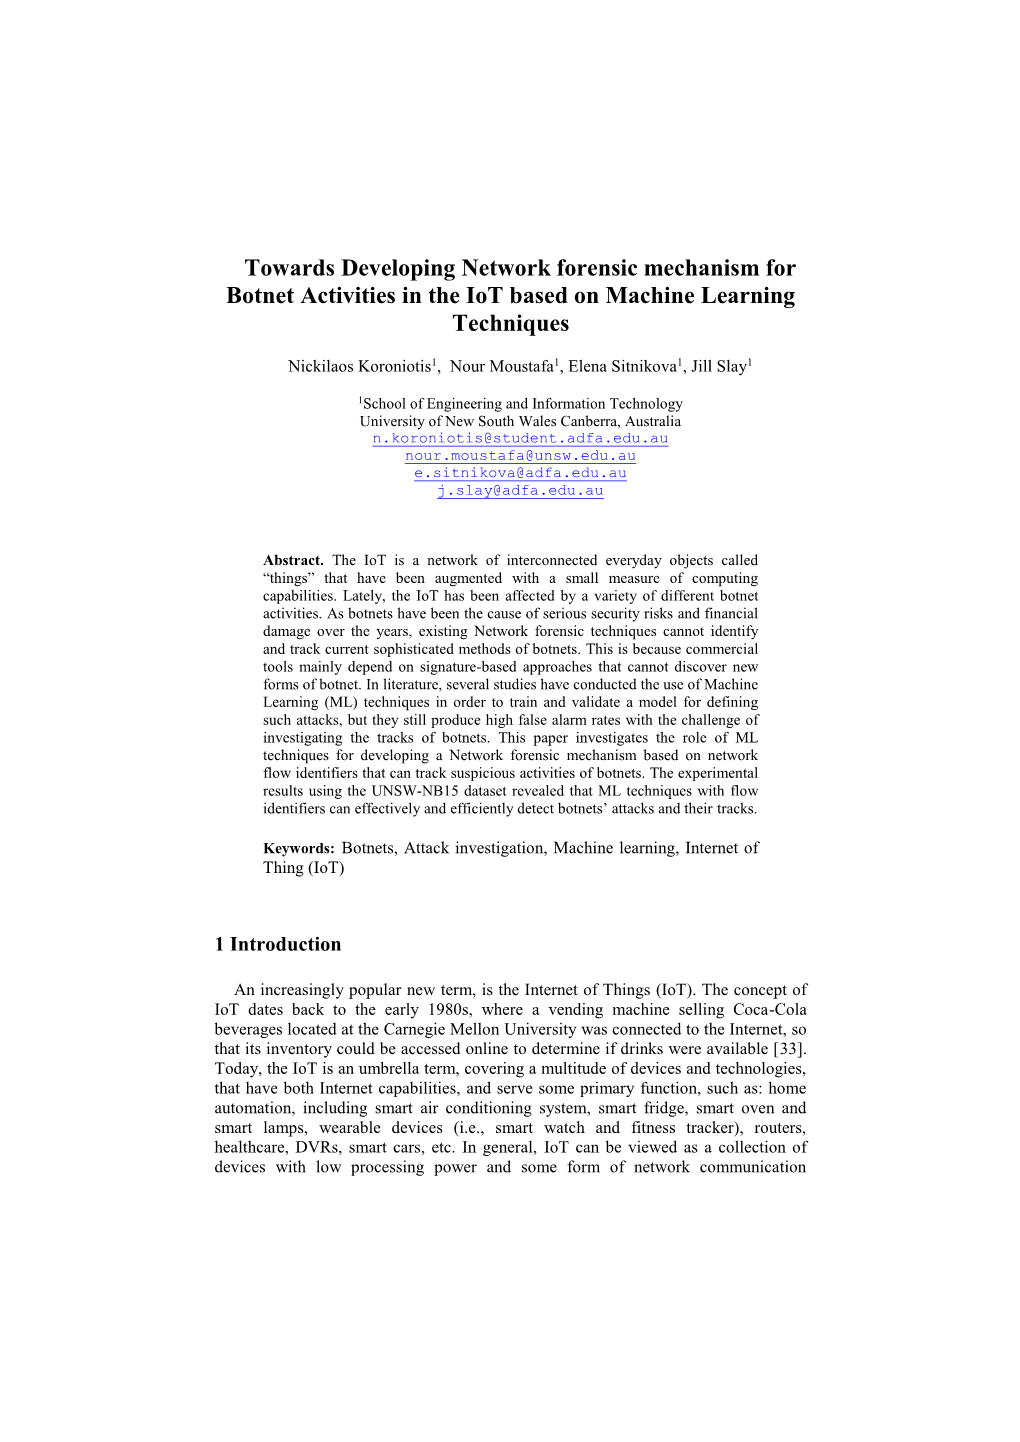 Towards Developing Network Forensic Mechanism for Botnet Activities in the Iot Based on Machine Learning Techniques